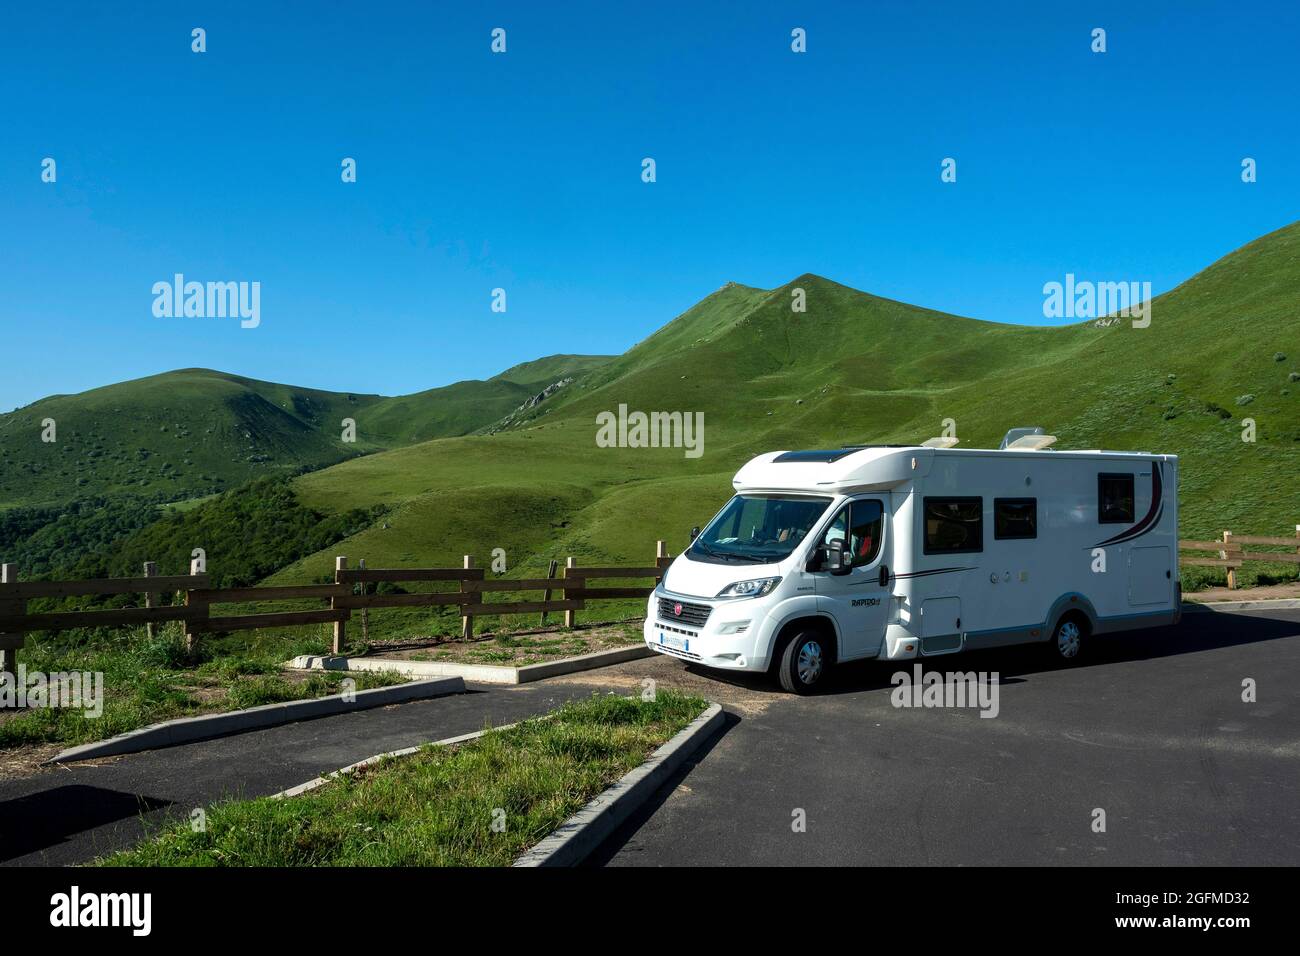 Motorhome at the foot of the Monts Dore in the Auvergne Volcanoes Natural Park, Puy de Dome department, Auvergne-Rhone-Alpes, France Stock Photo